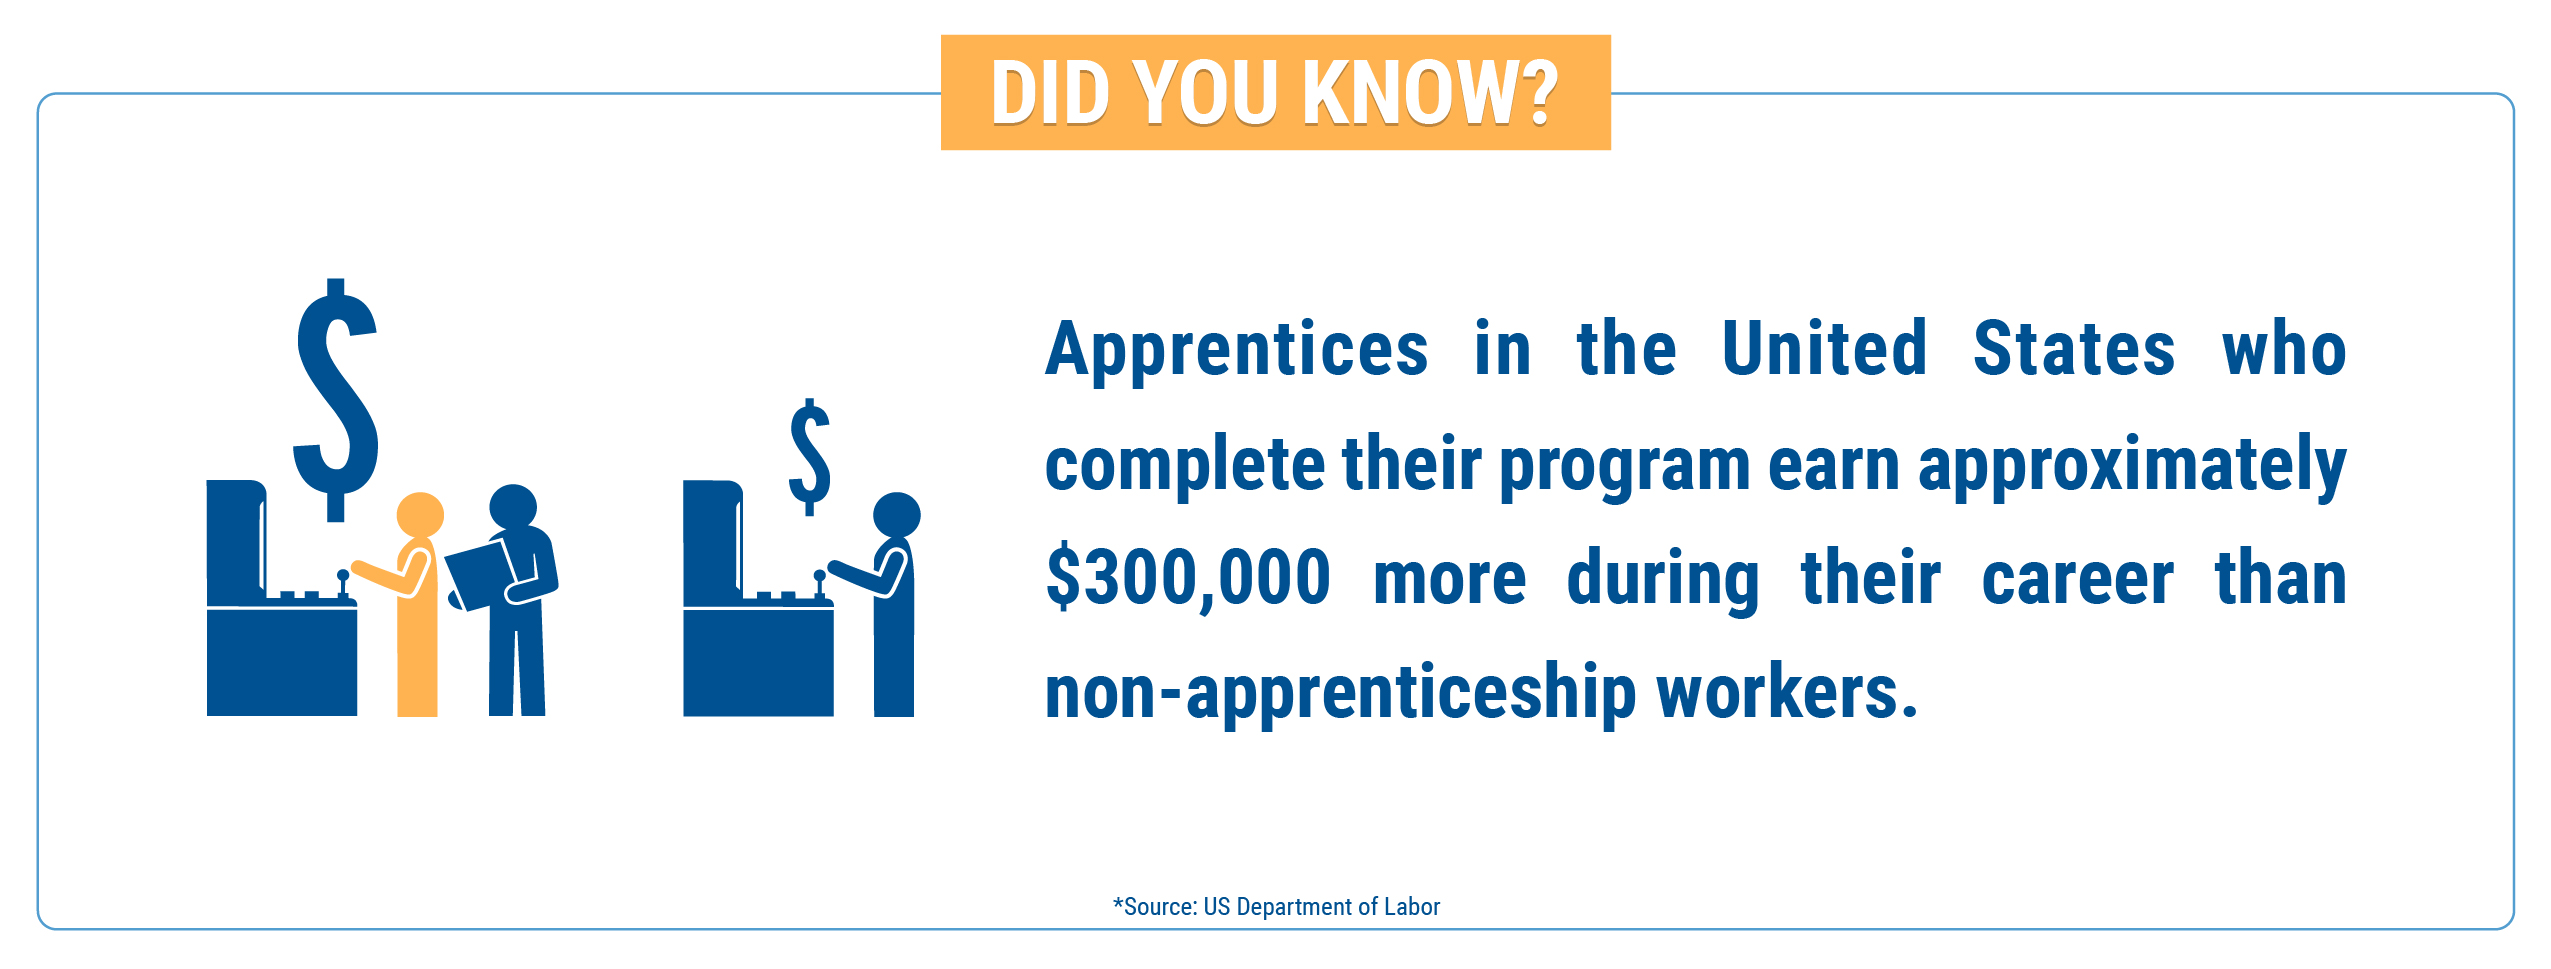 Did you know? Apprentices in the United States who complete their program earn approximately 300,000 more during their career than non apprenticeship workers..